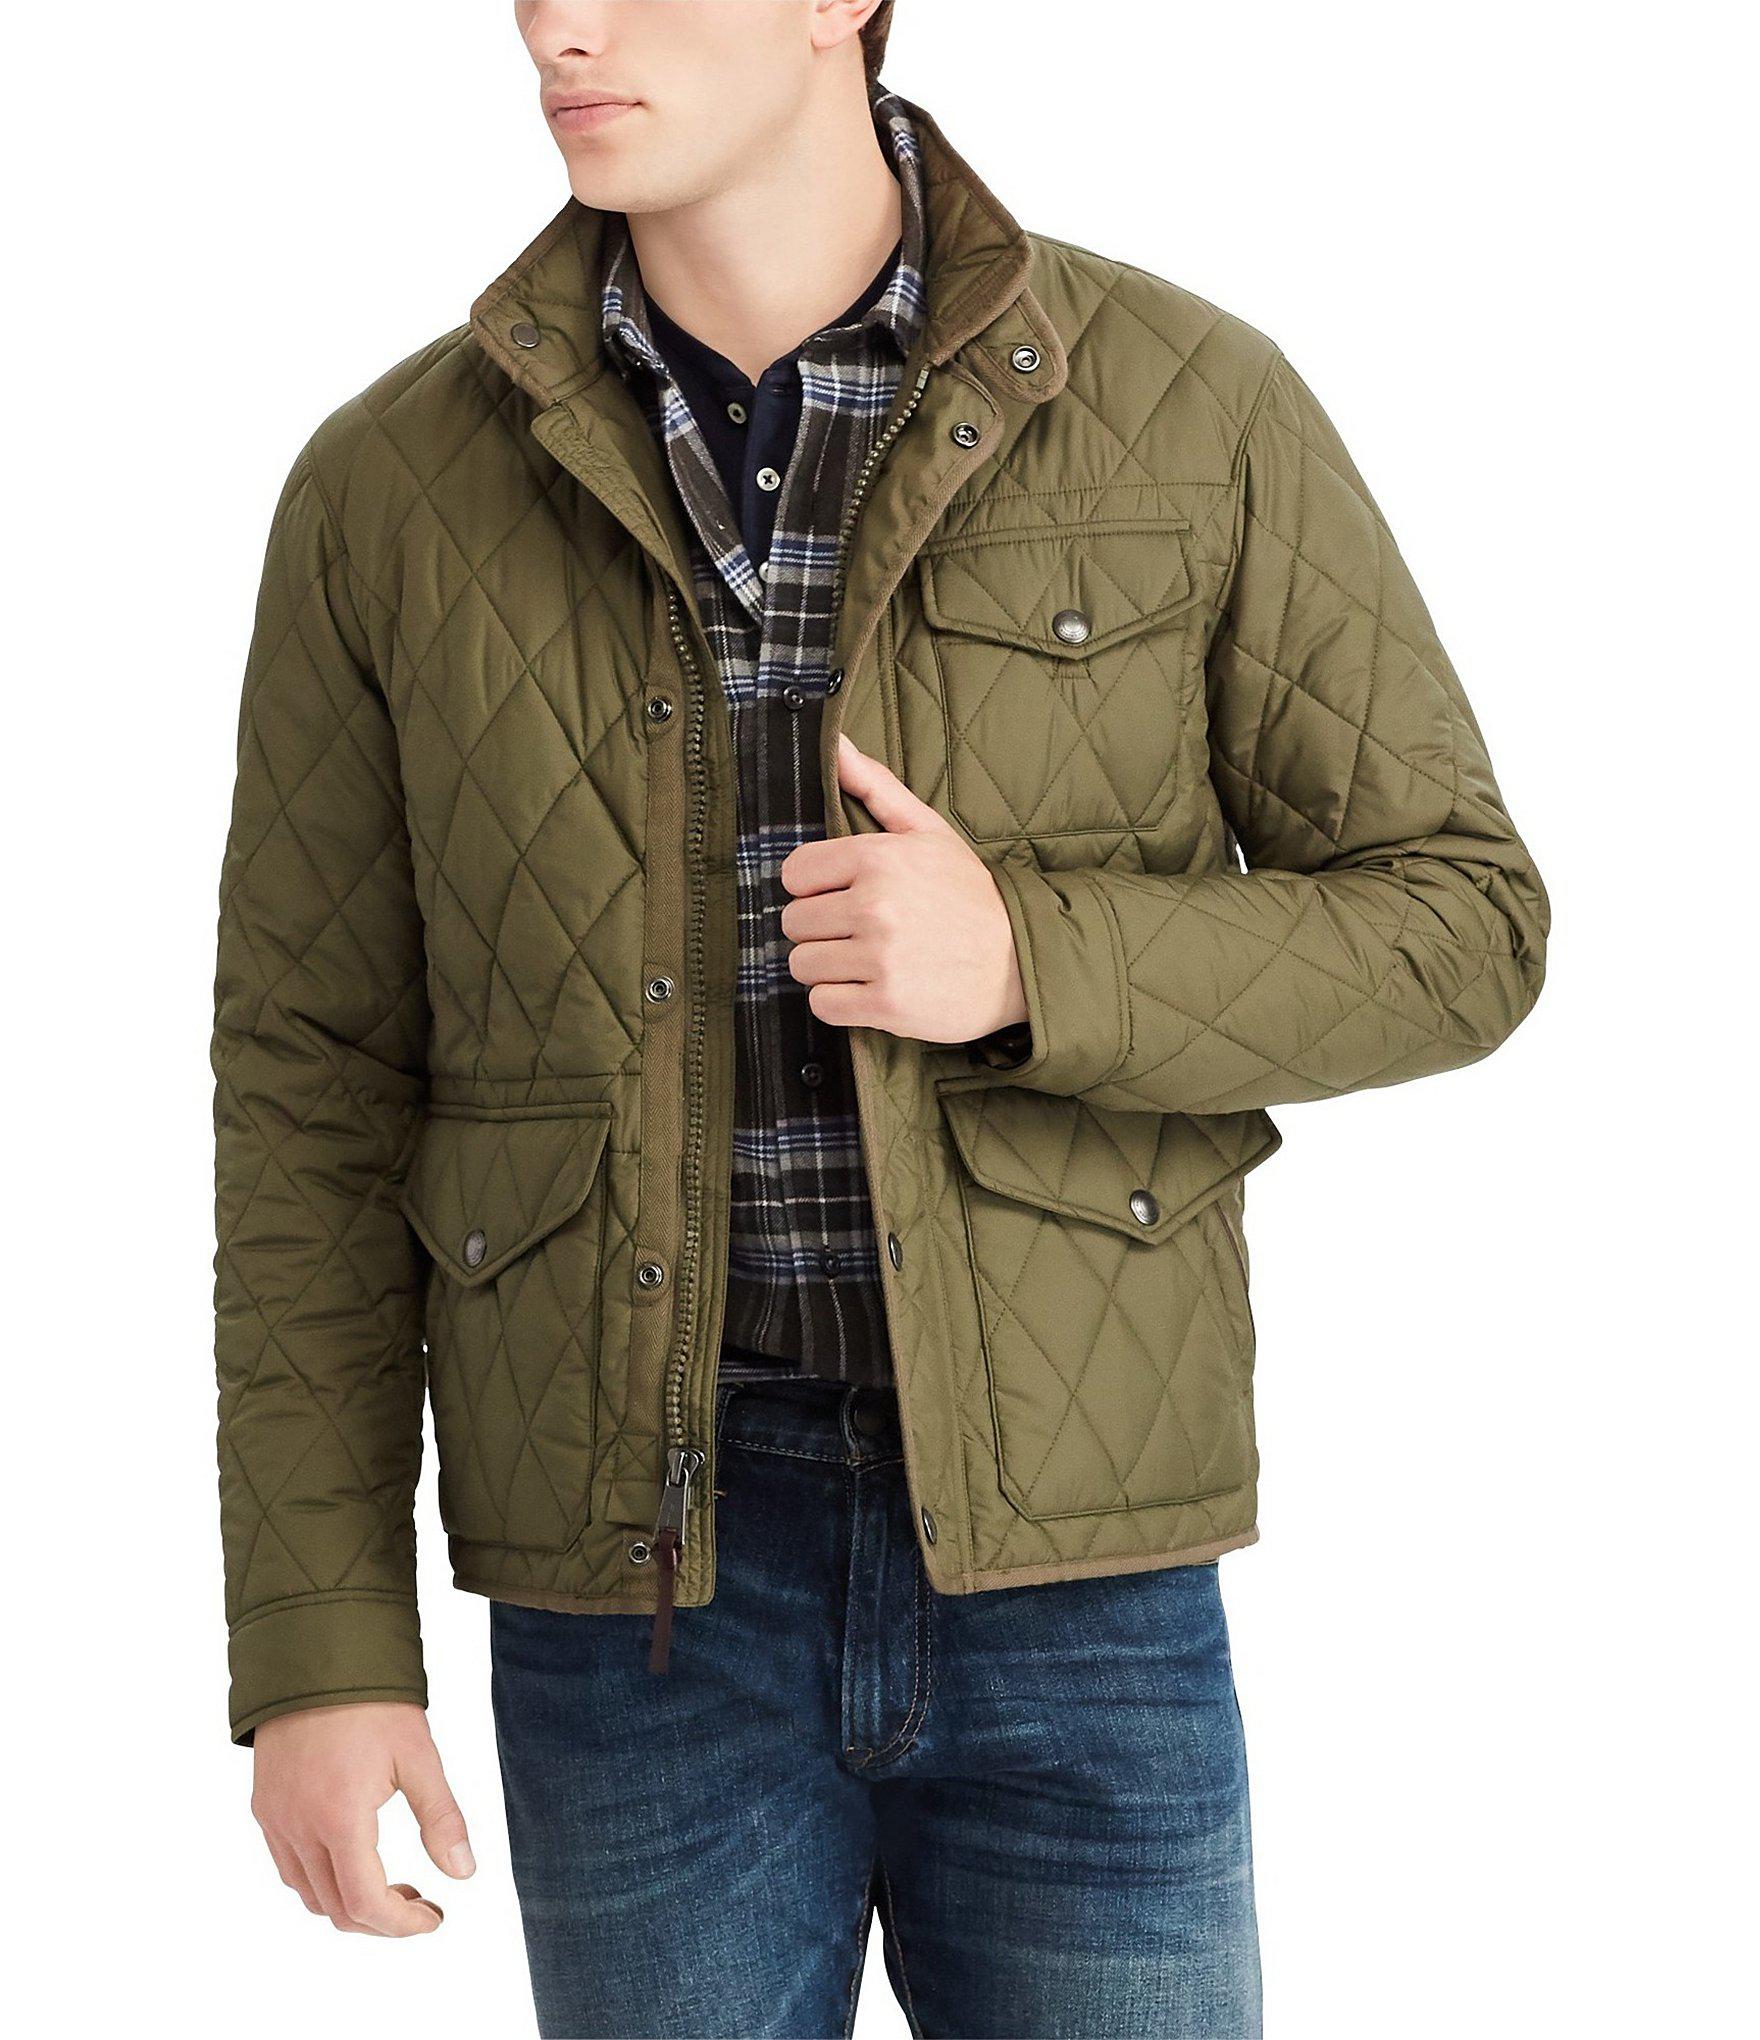 Lyst - Polo Ralph Lauren Quilted Jacket in Green for Men - Save 6. ...